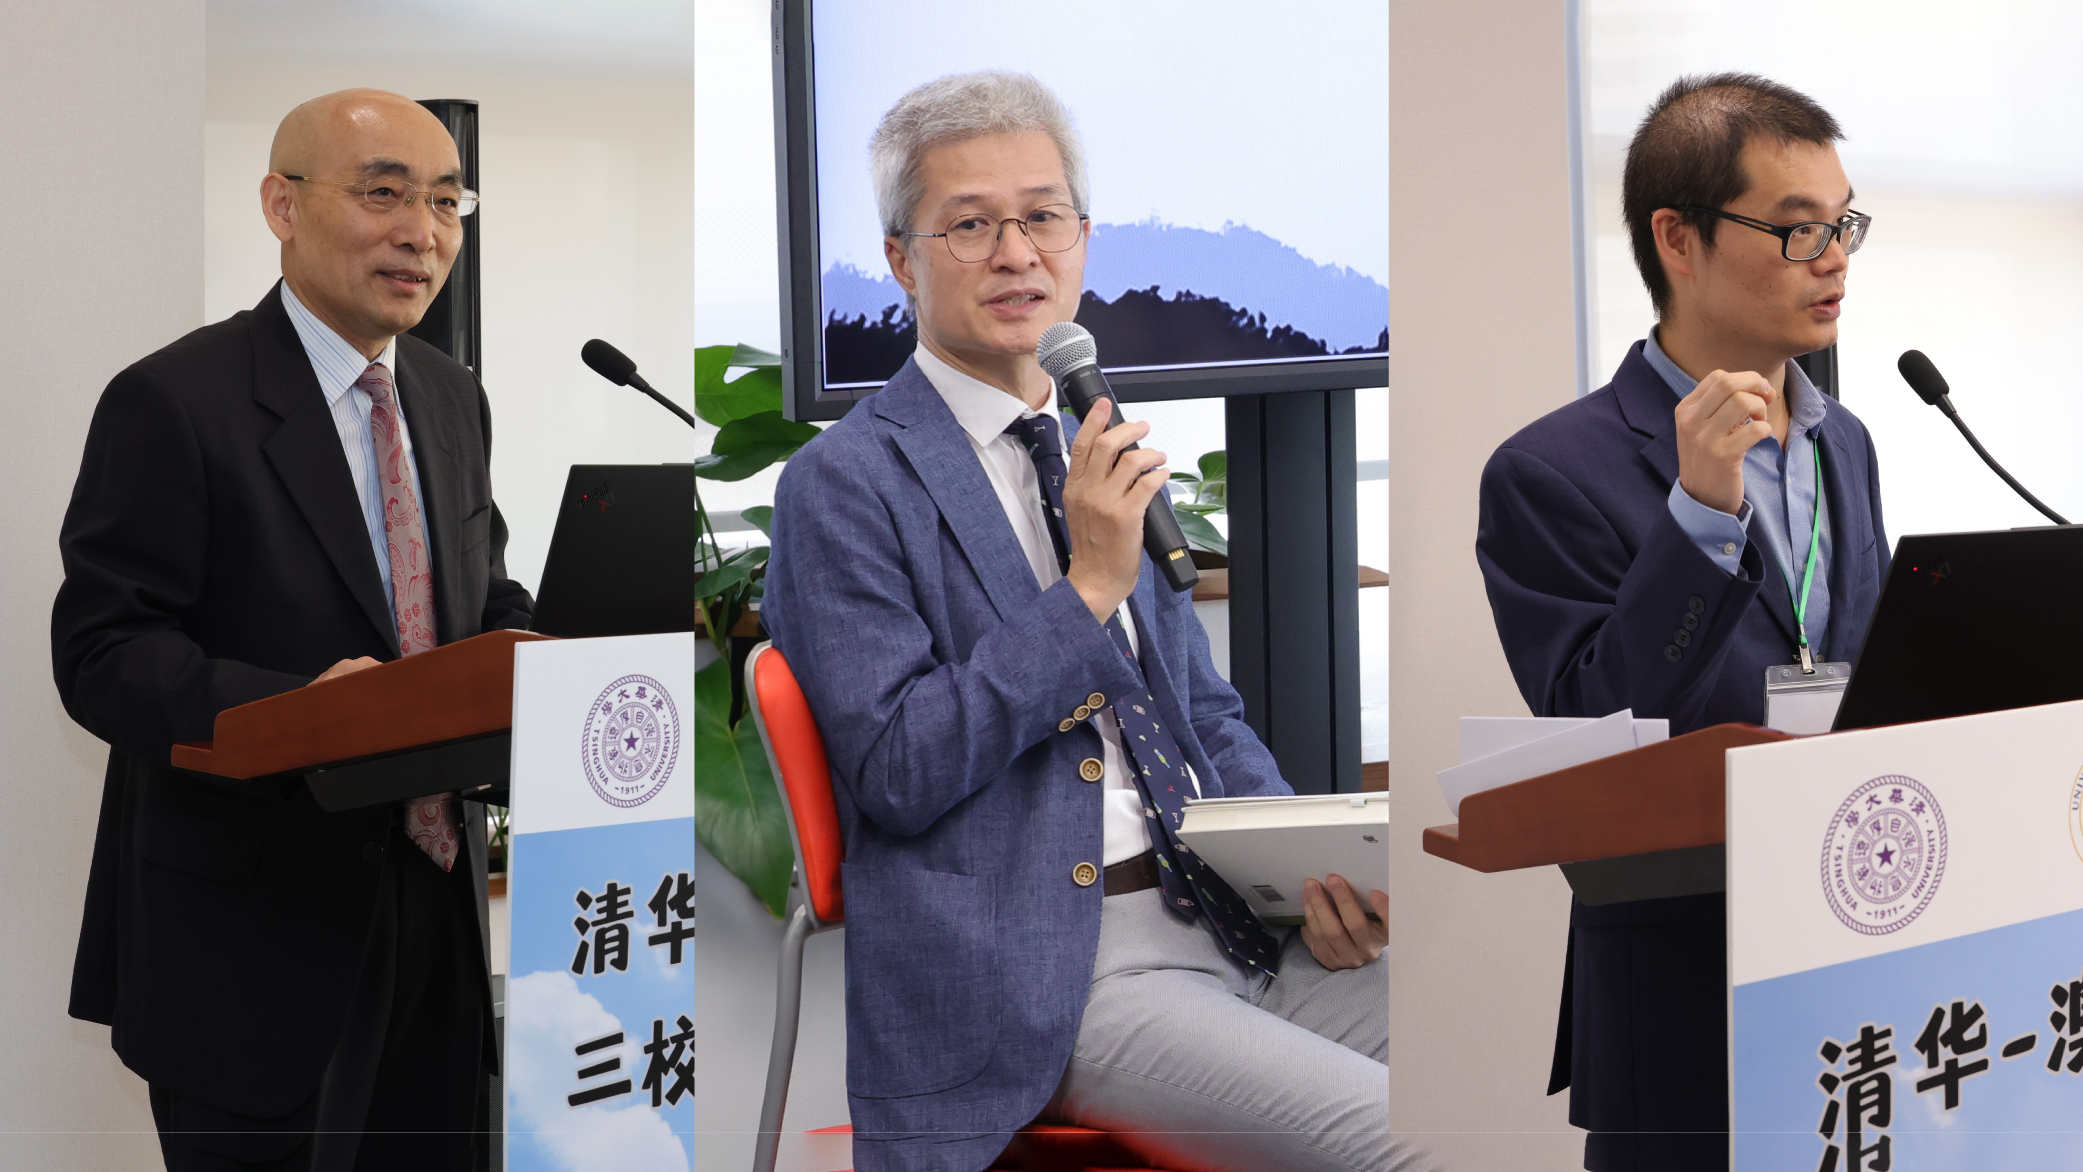 PolyU hosts tripartite exchange programme to promote Chinese culture and national identity